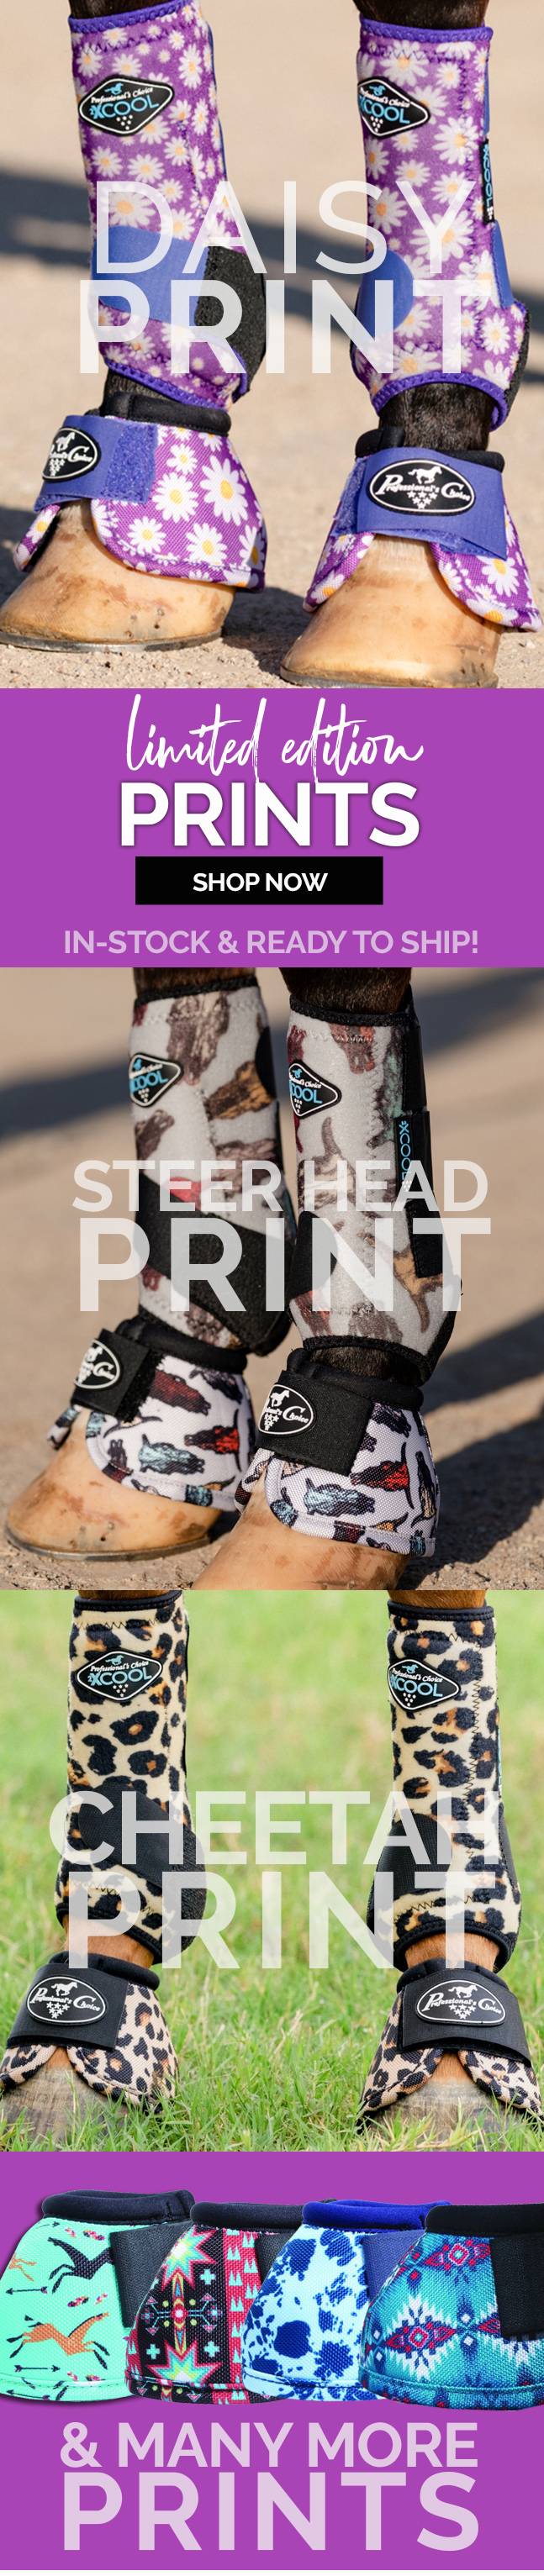 Limited Edition Prints! Professional's Choice Boots in Stock